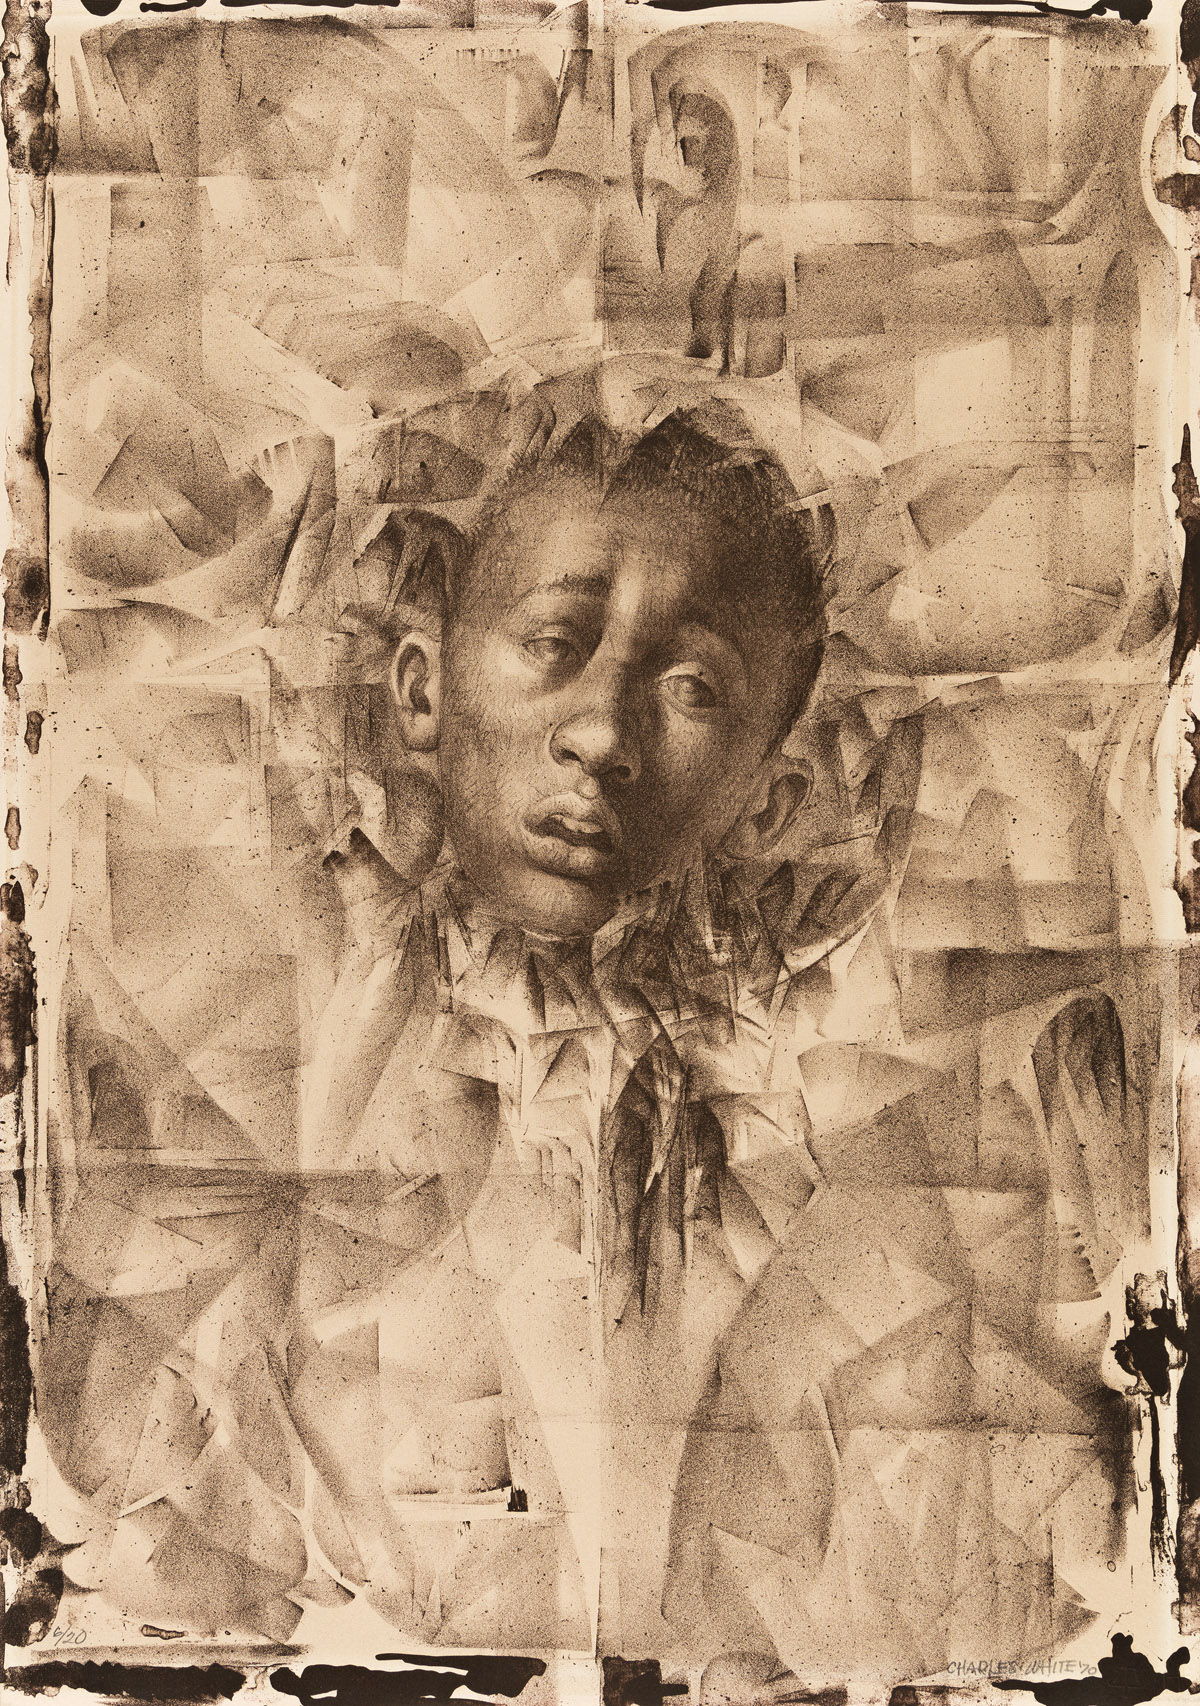 CHARLES WHITE (1918 - 1979) Wanted Poster Series #11 and #11a (Positive and Negative Image).